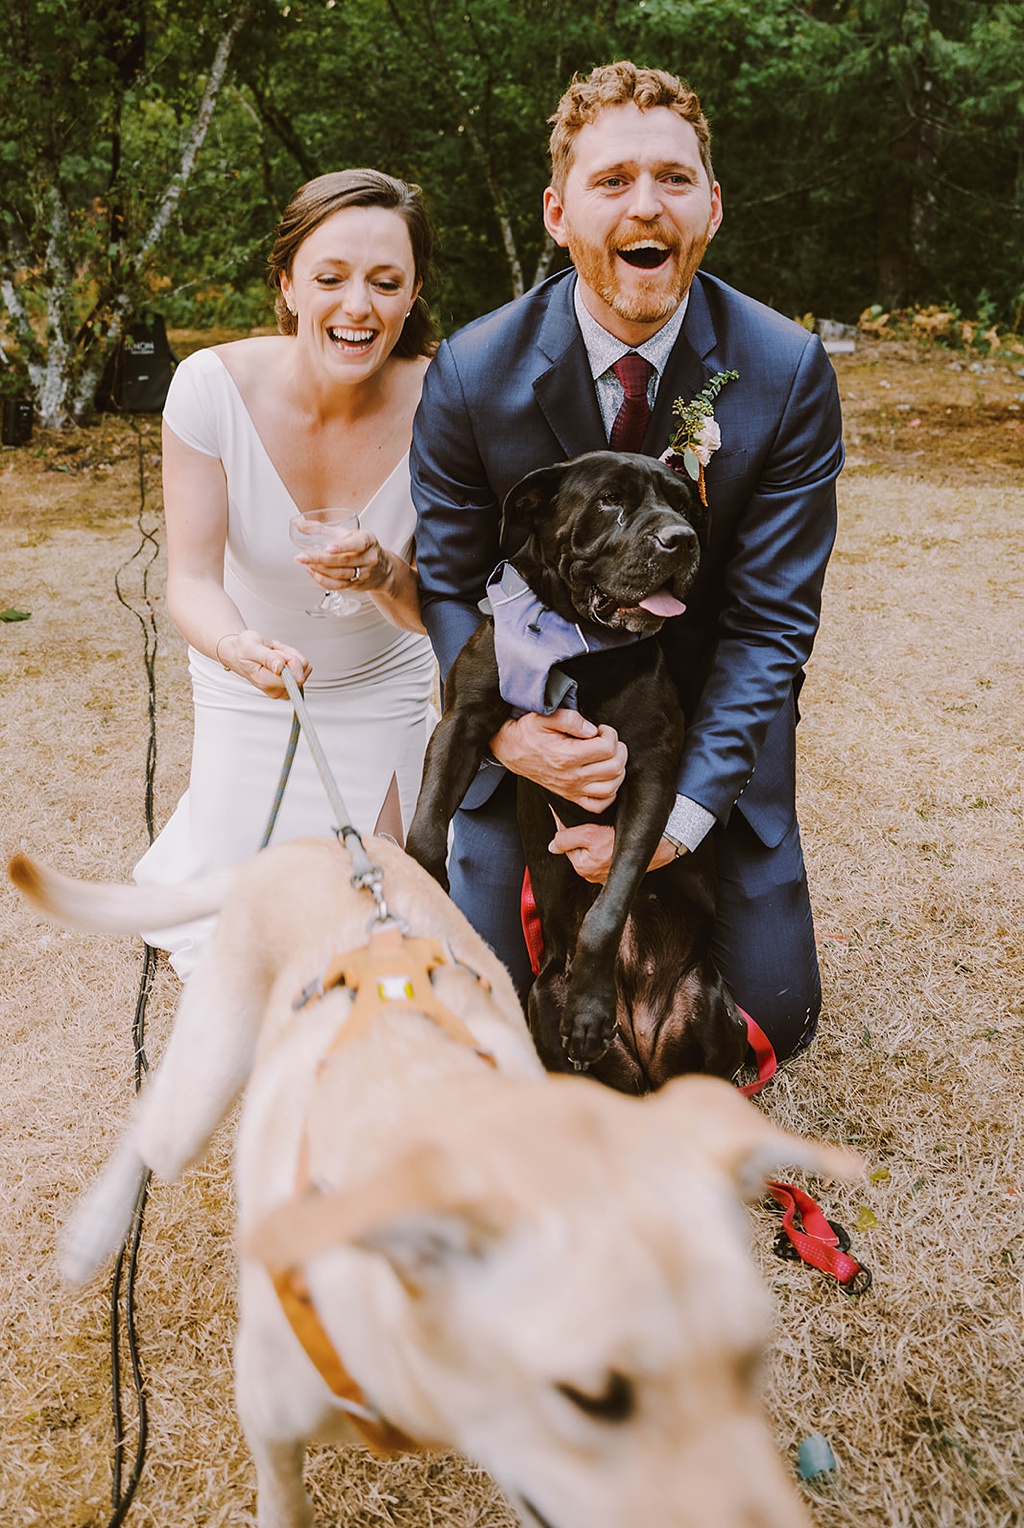 The bride and groom try to wrangle their two dogs at the wedding